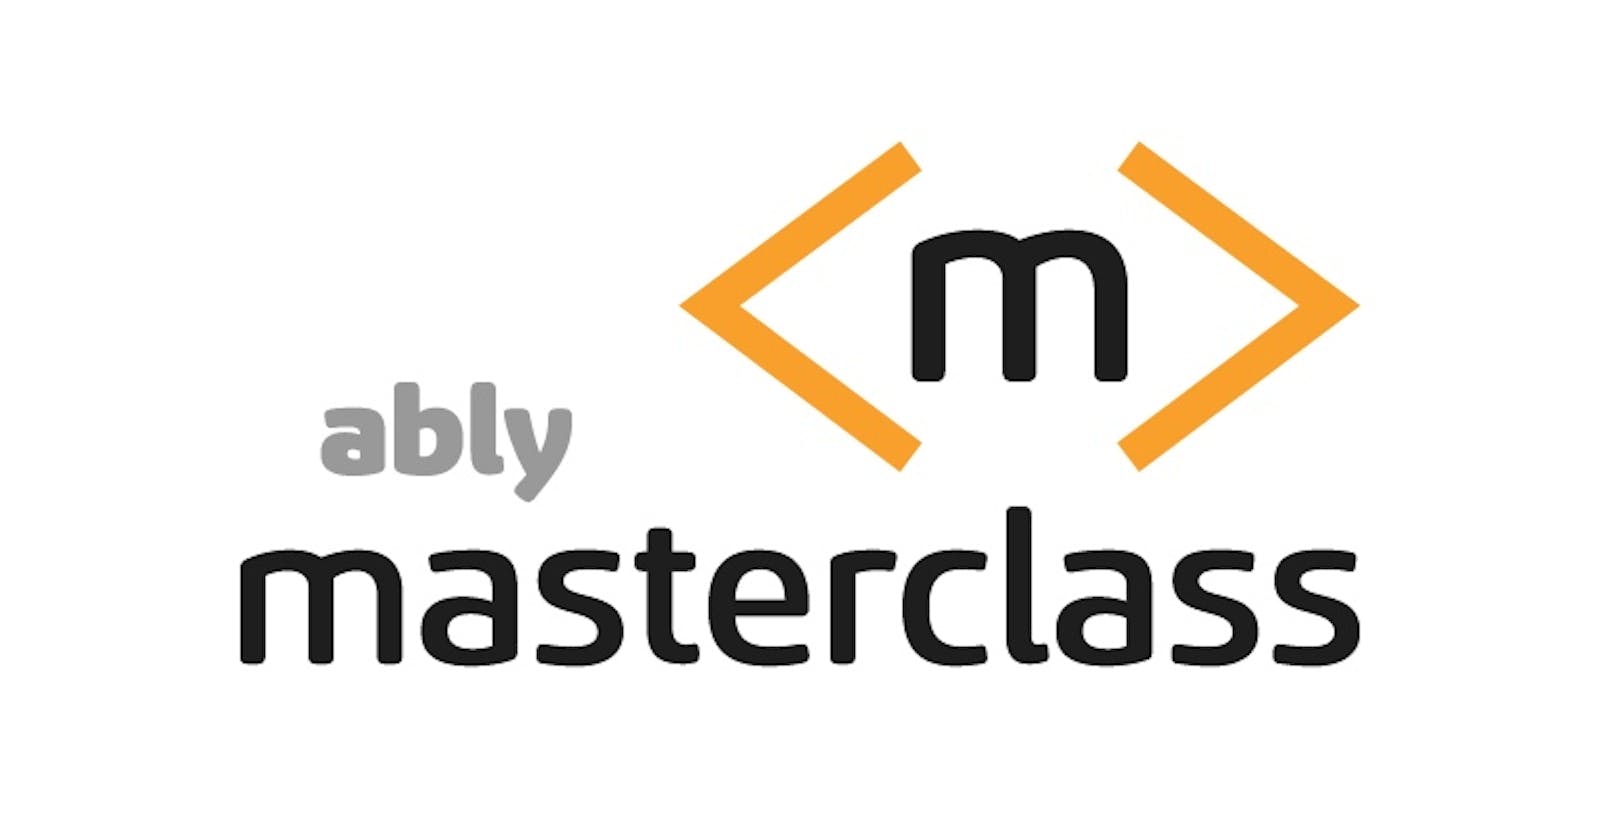 Ably Masterclass | Episode 2 - Building an IoT based realtime attendance system for Slack